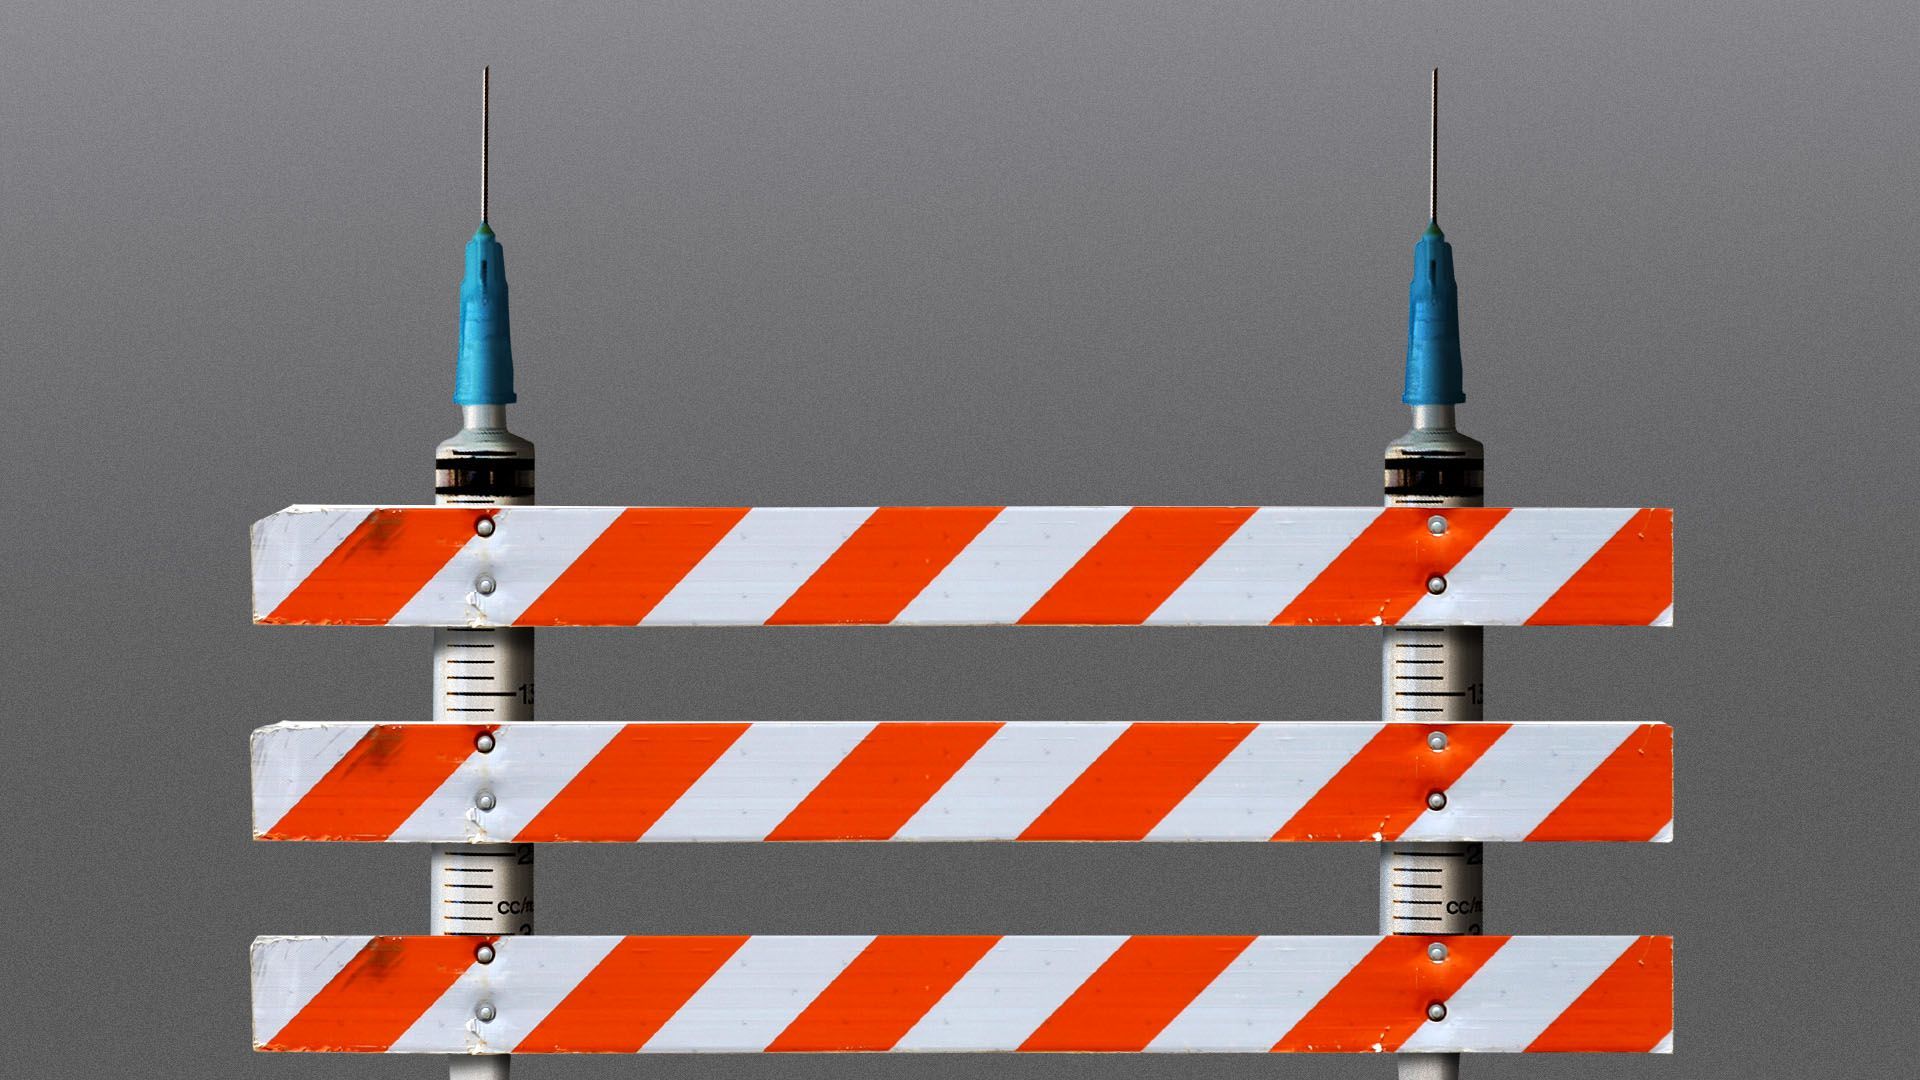 Illustration of a road barricade made out of syringes